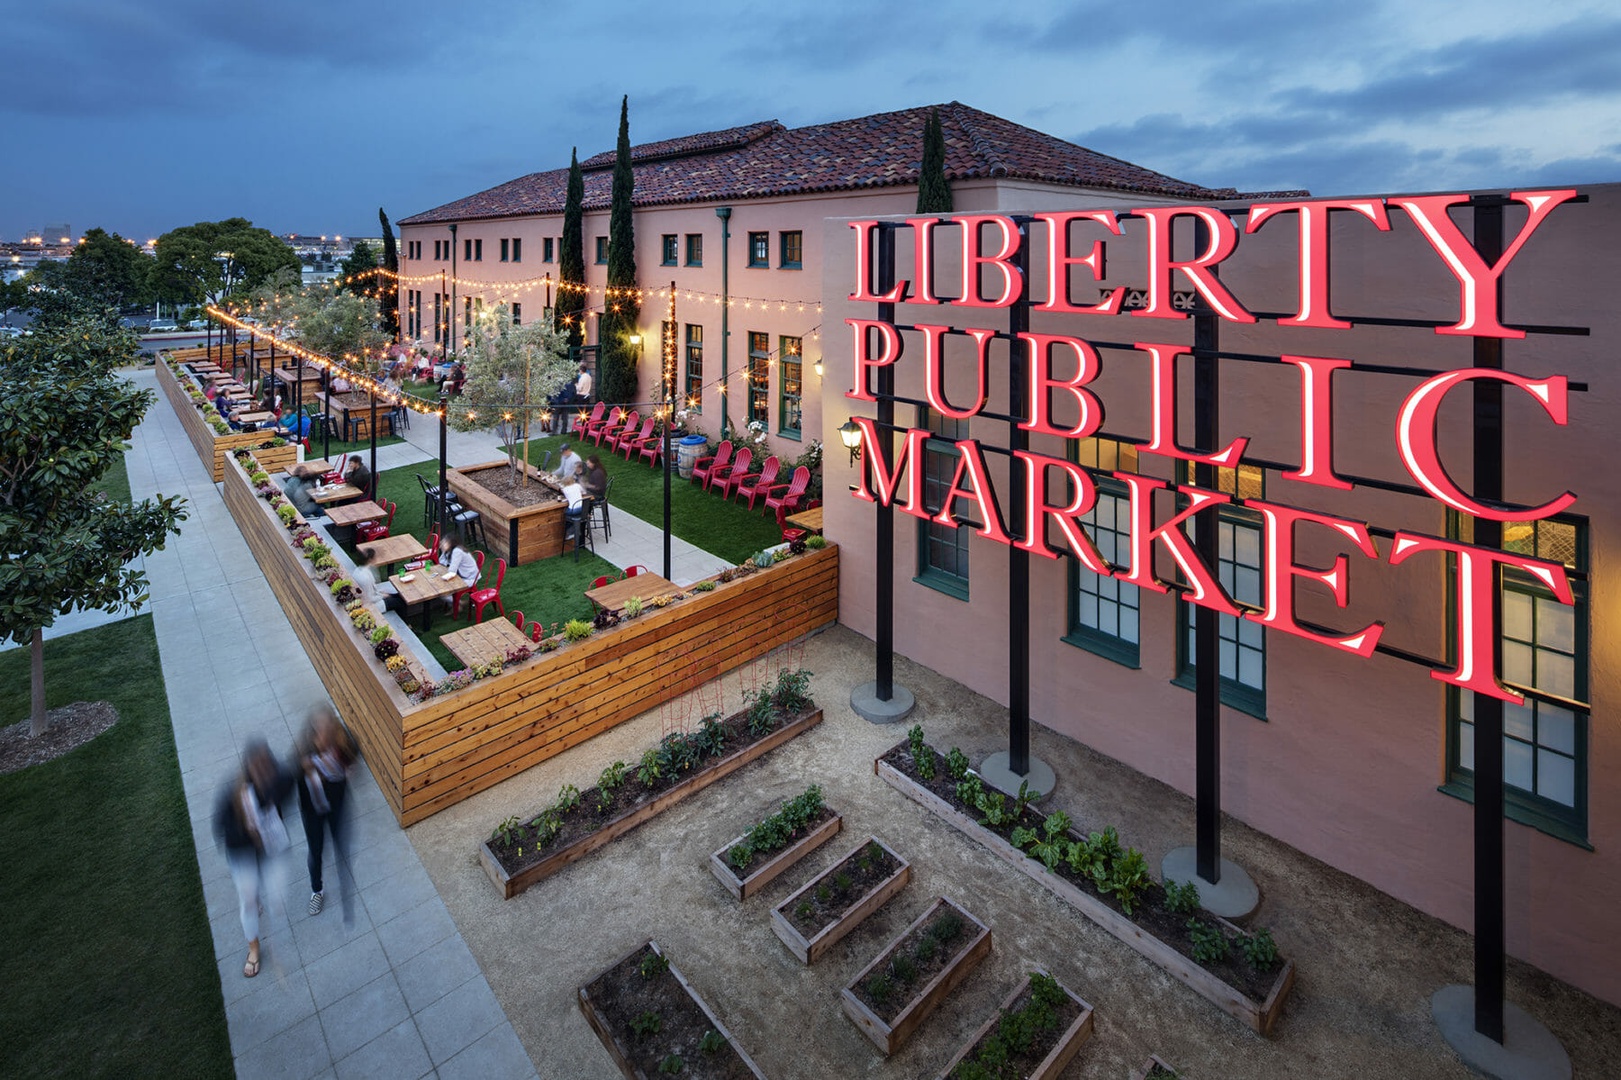 Liberty Public Market, located at Liberty Station, just minutes from the home